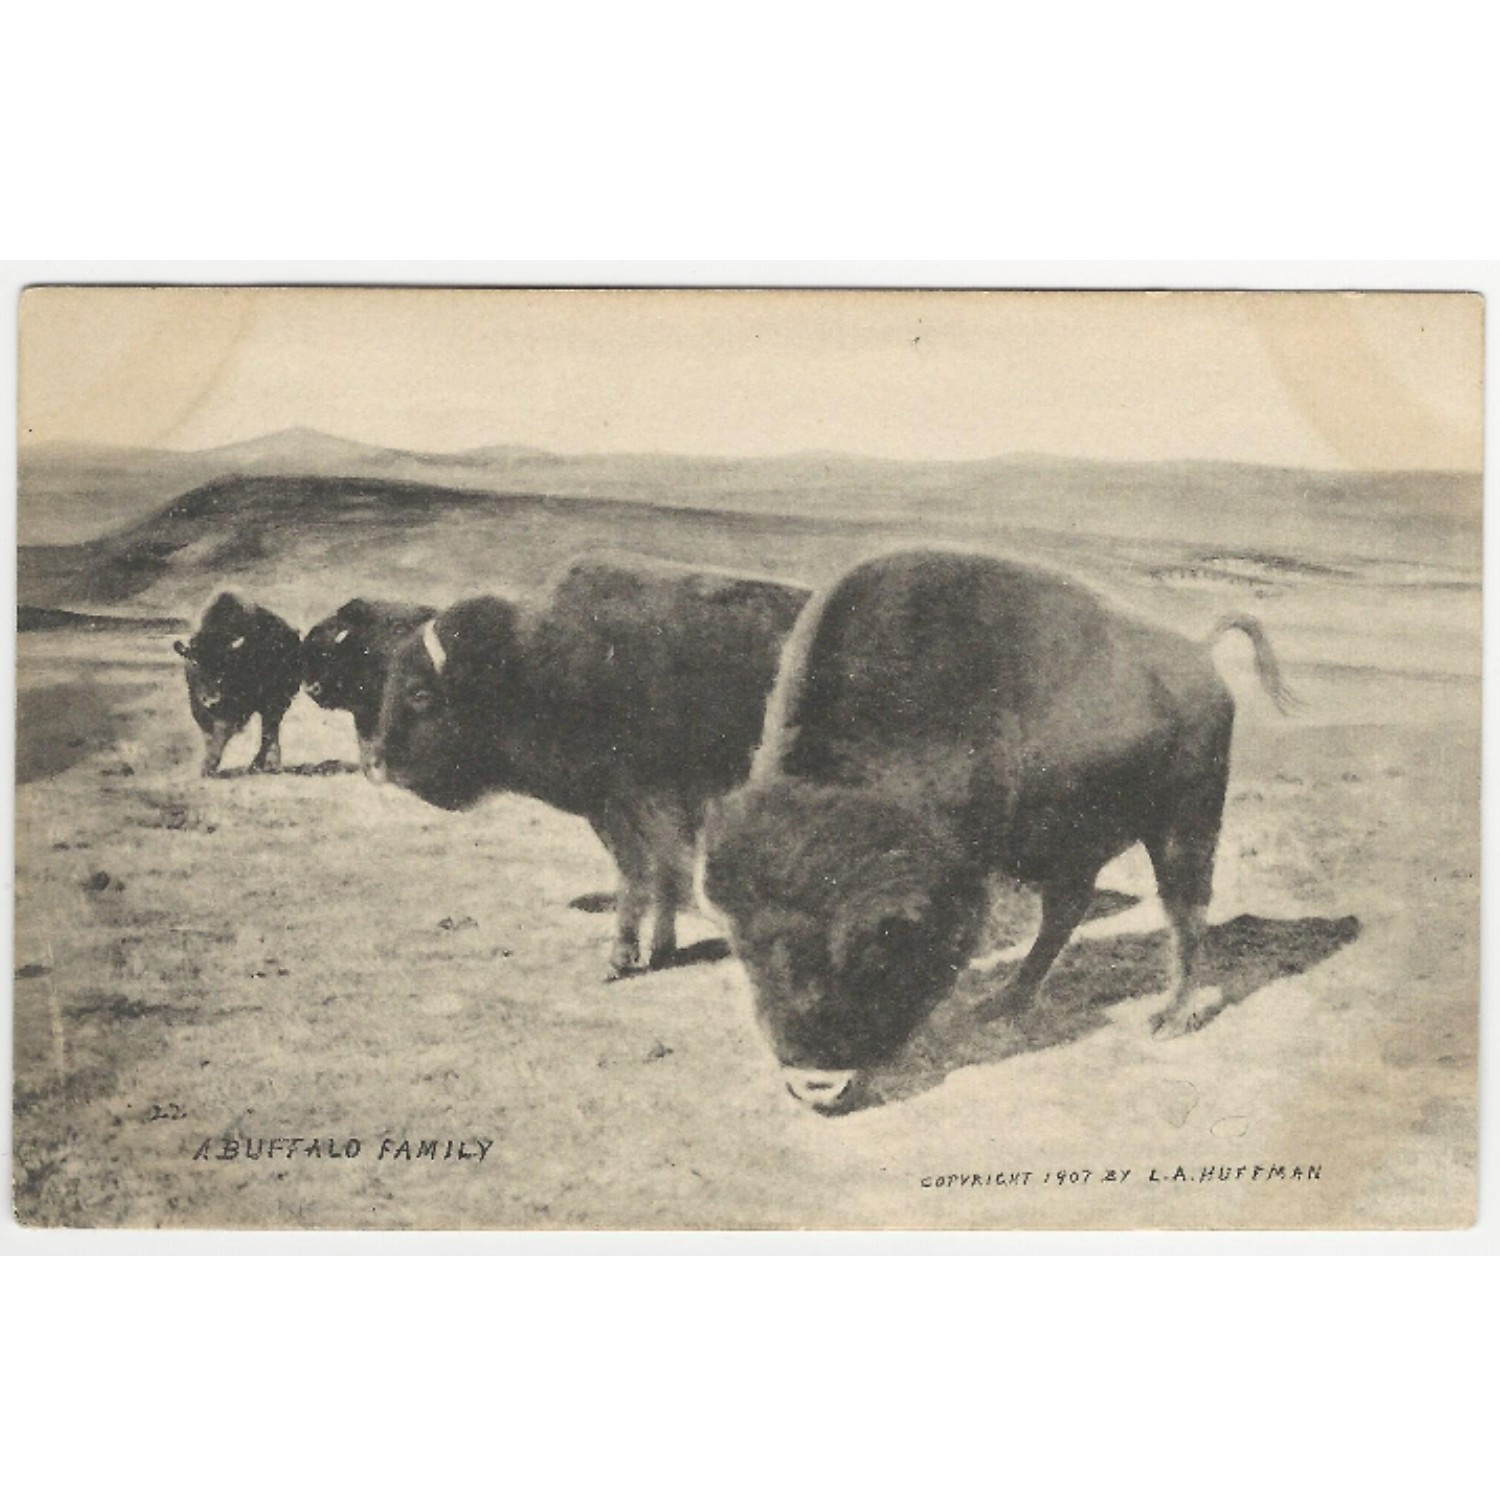 Postcard of a Buffalo family by L.A. Huffman